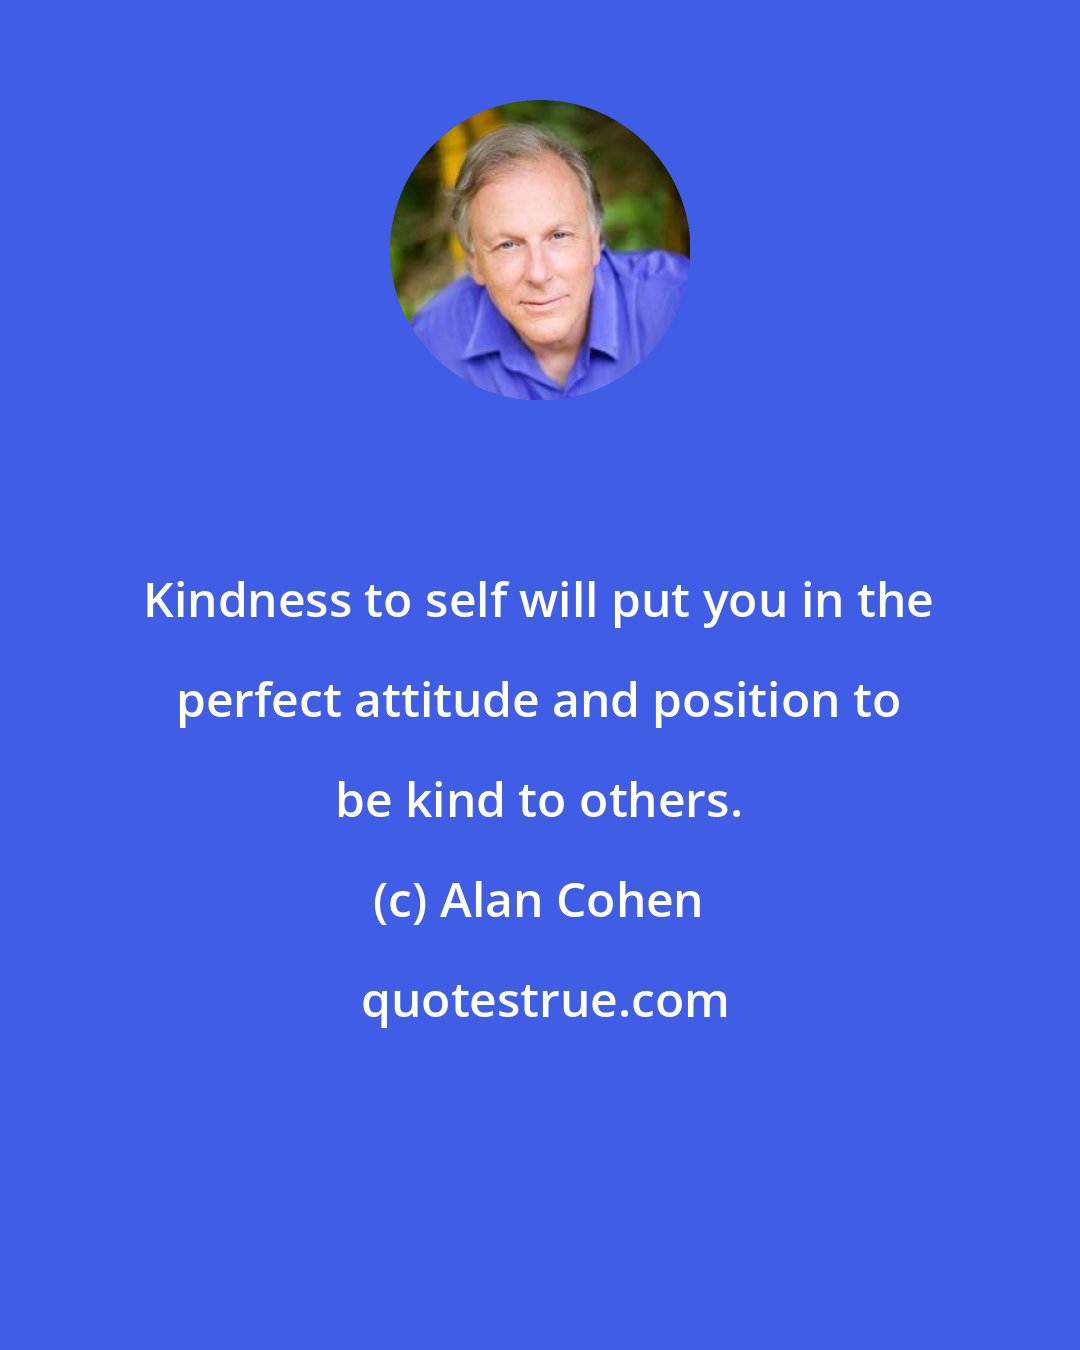 Alan Cohen: Kindness to self will put you in the perfect attitude and position to be kind to others.